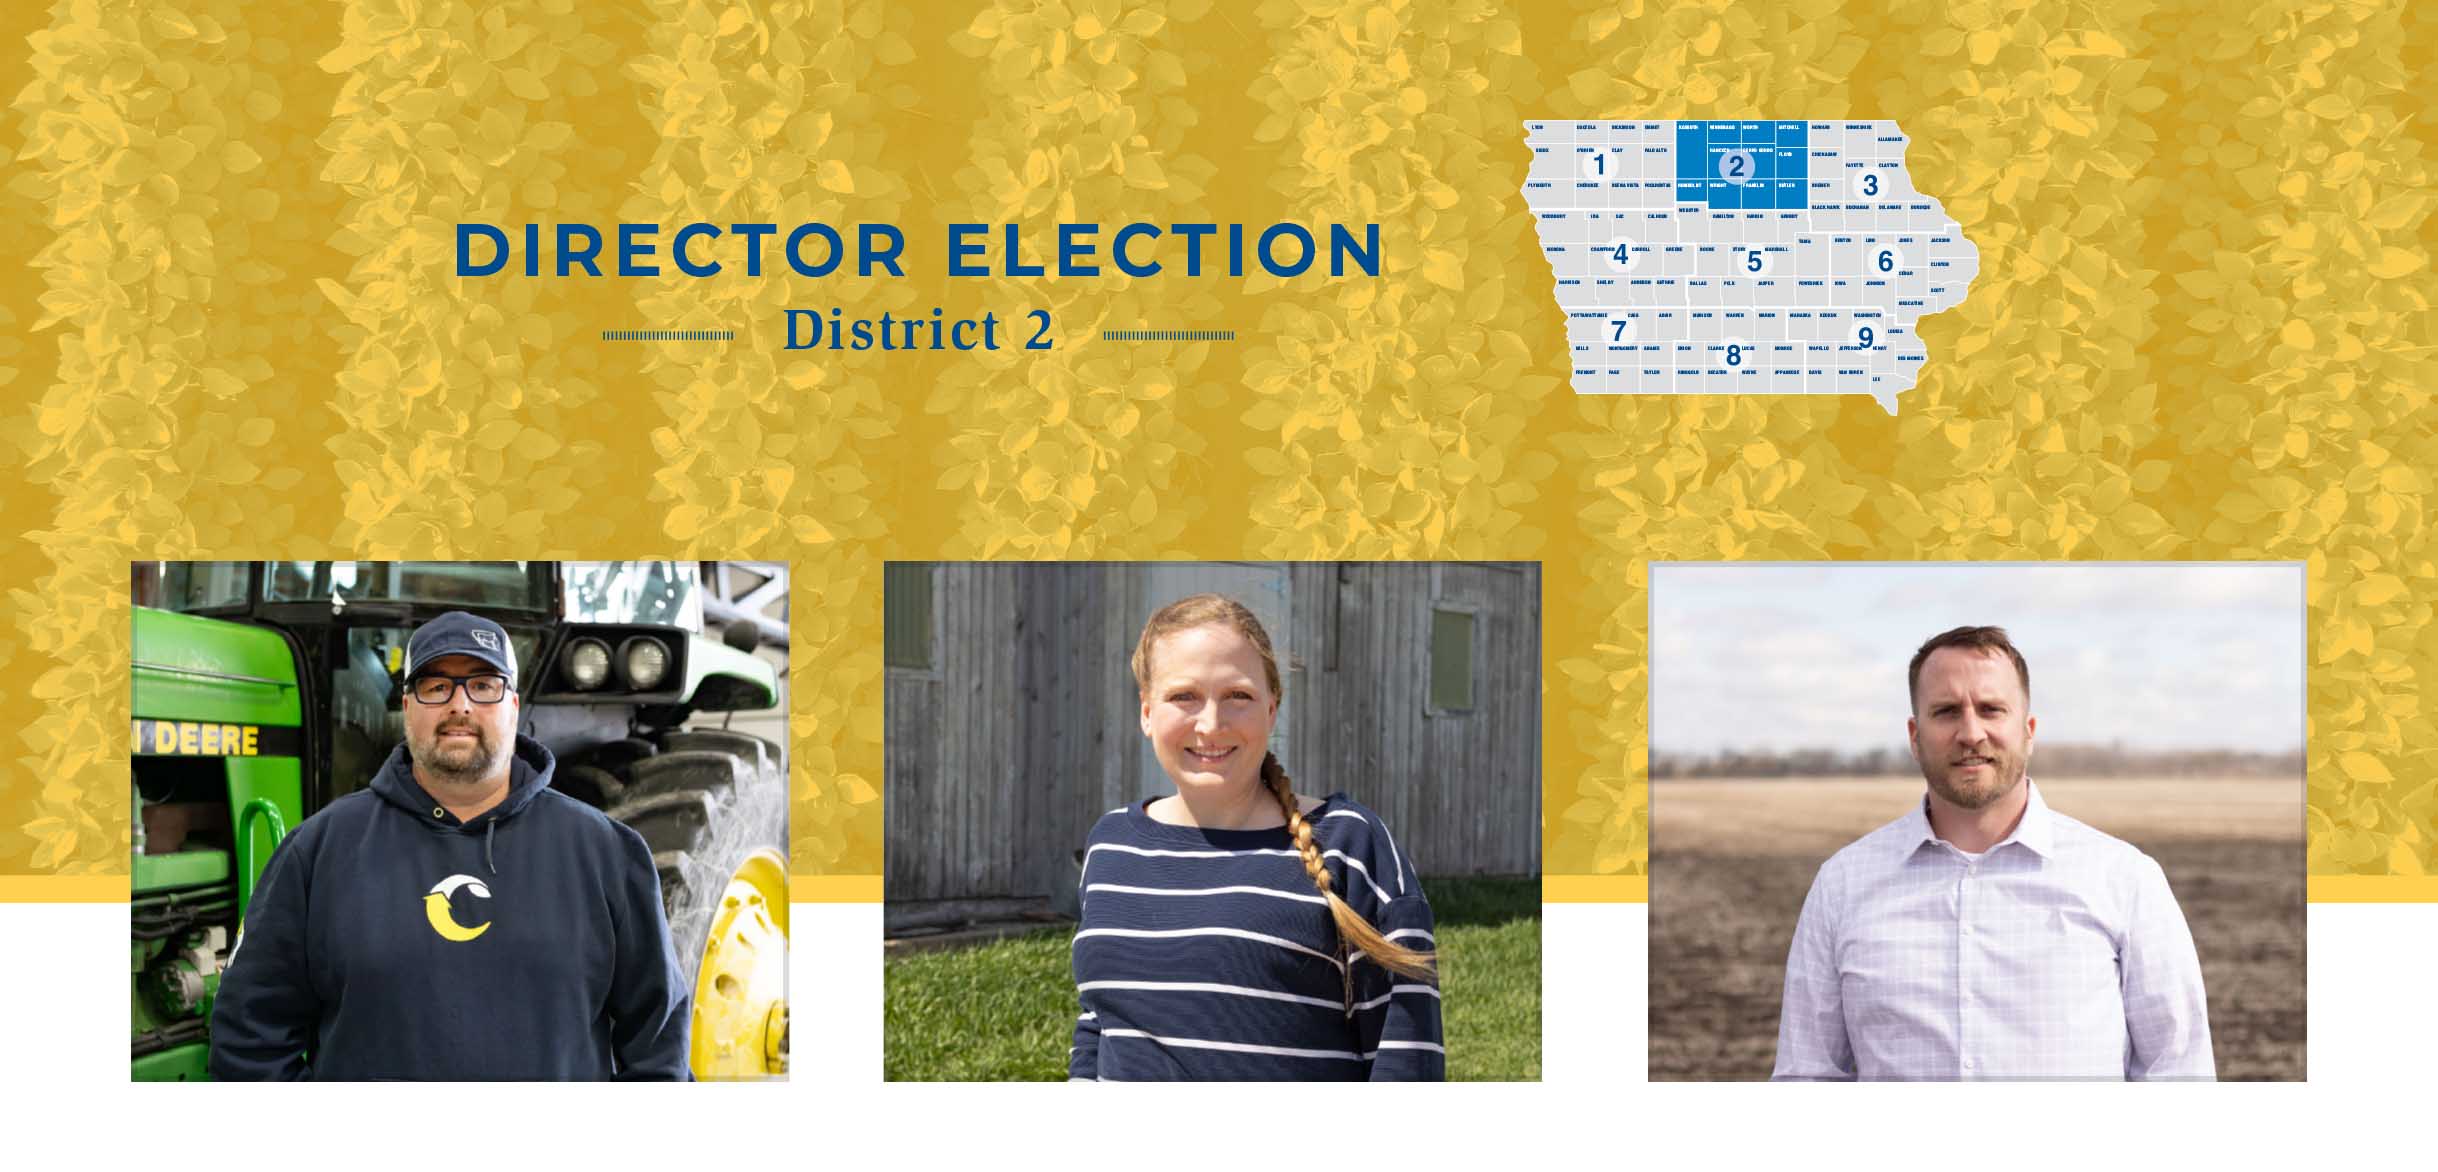 Farmers running for District 2